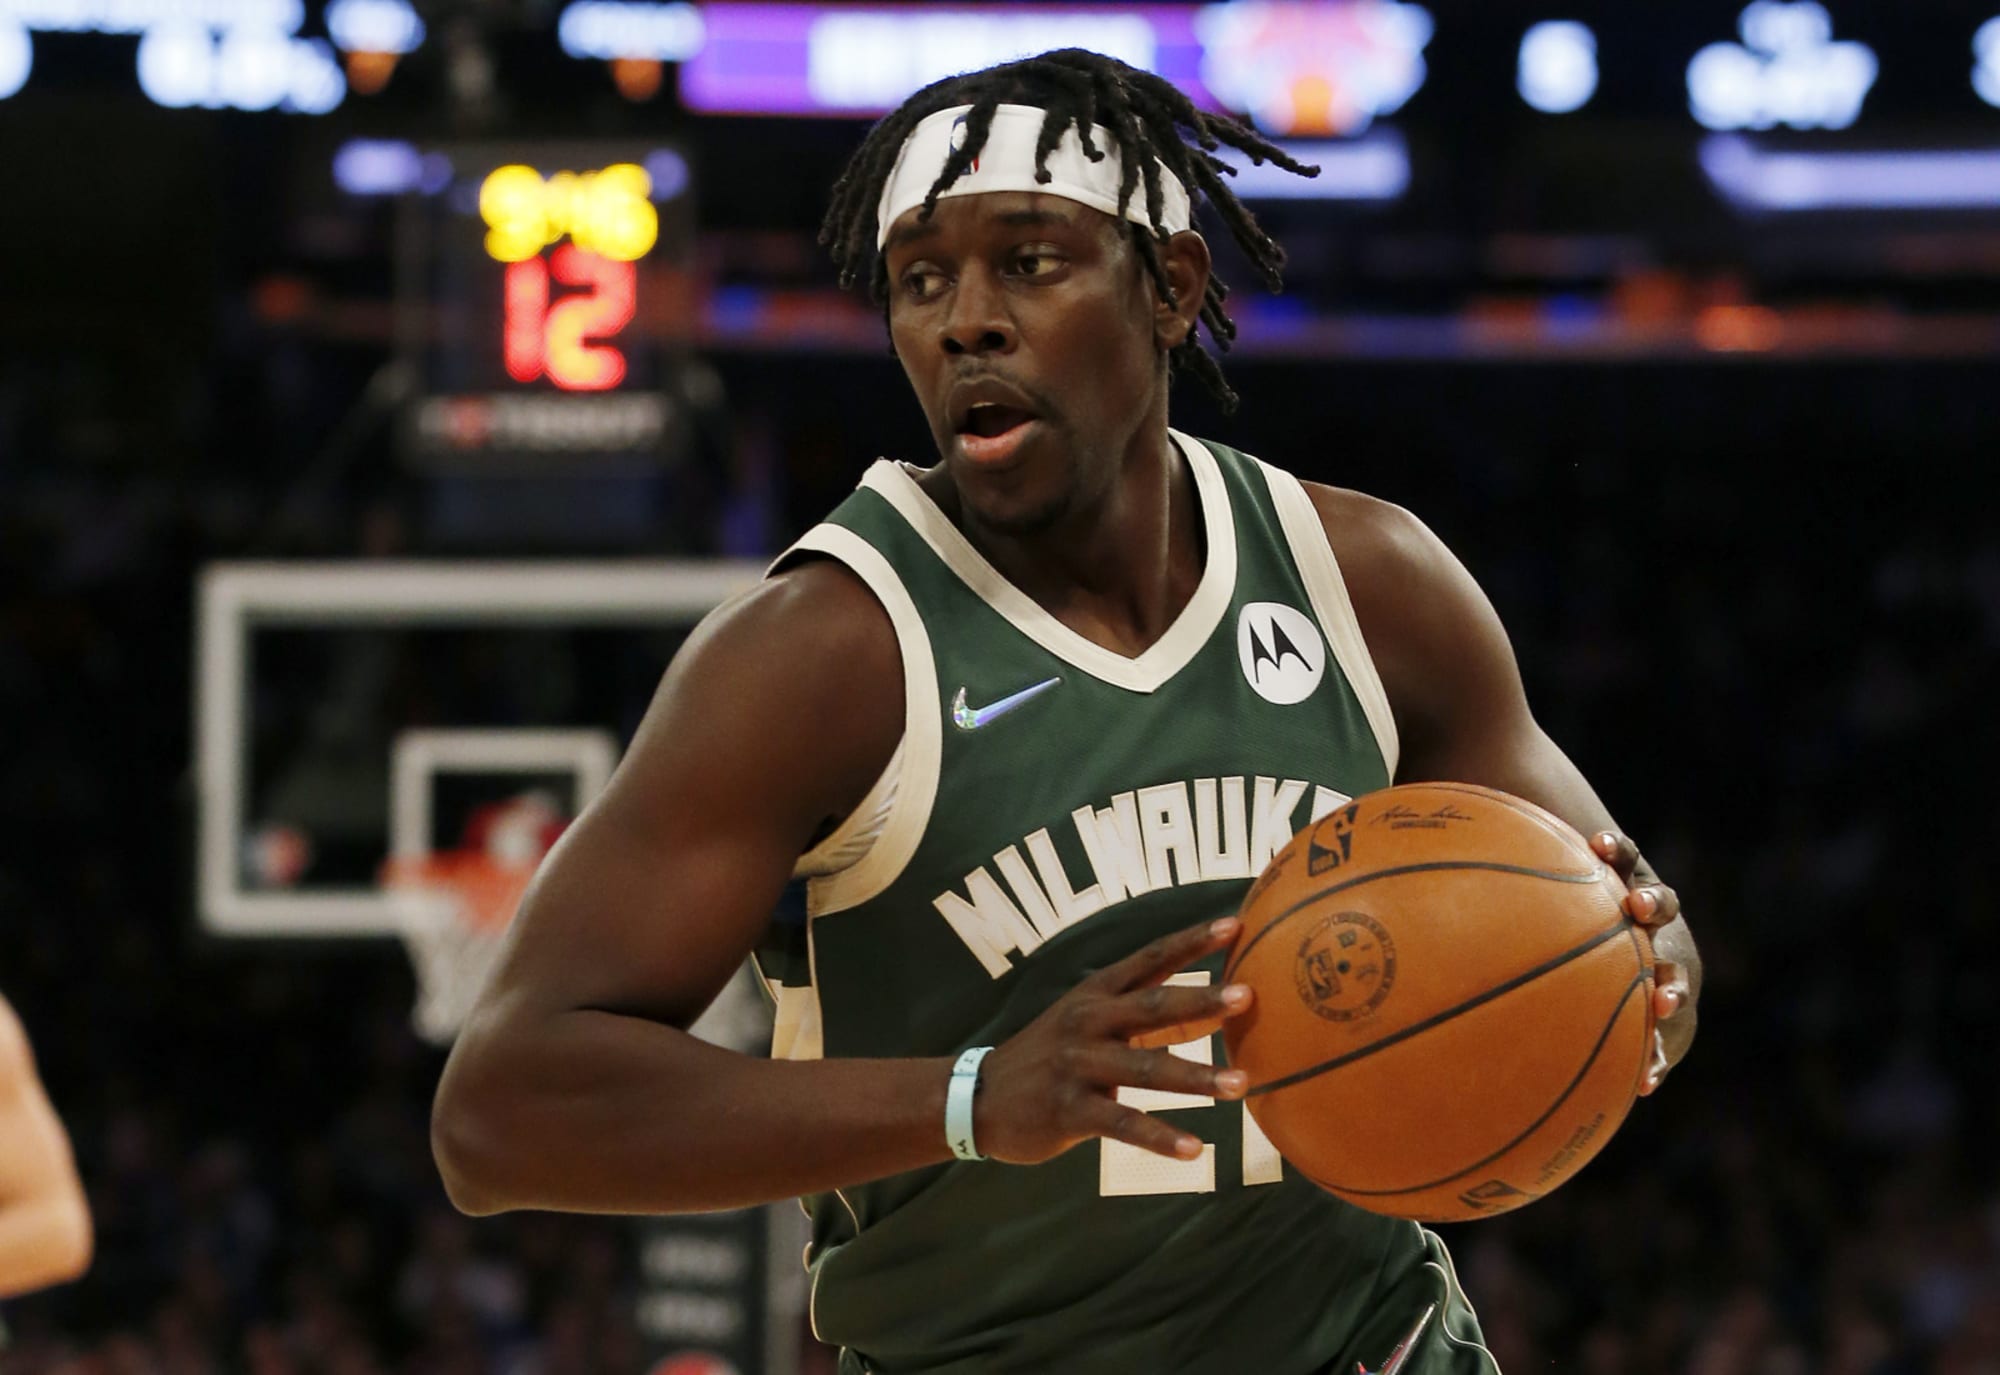 Momentous Adds NBA All-Star Jrue Holiday to Its Team of Athlete Ambassadors